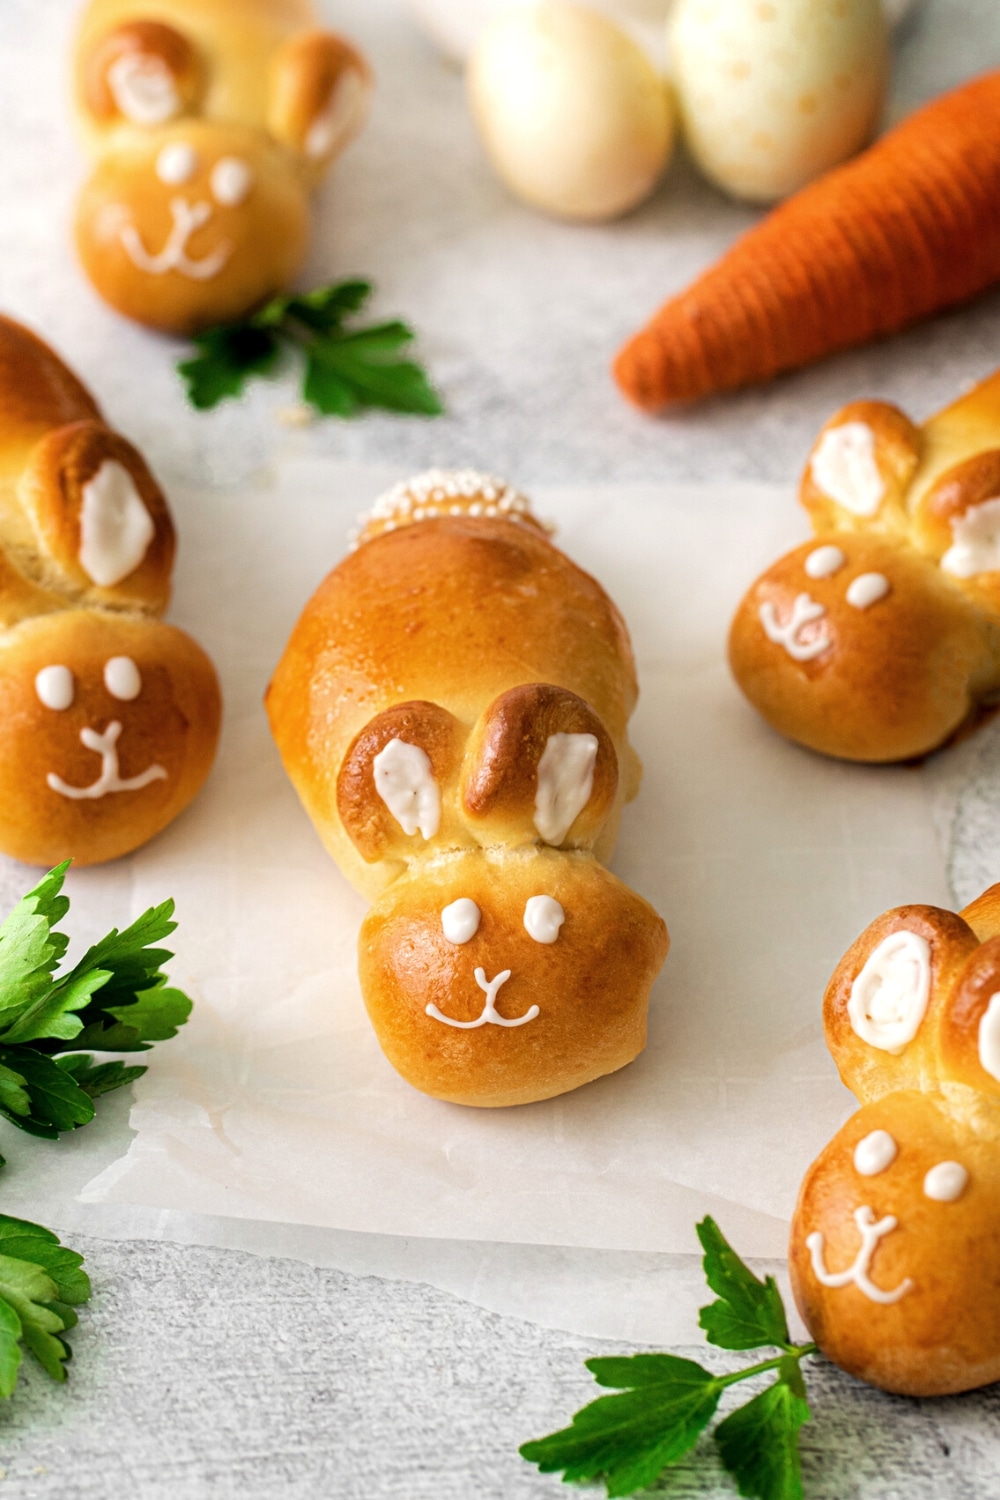 Batch of Easter Bunny bread rolls assembled from homemade yeast dough.